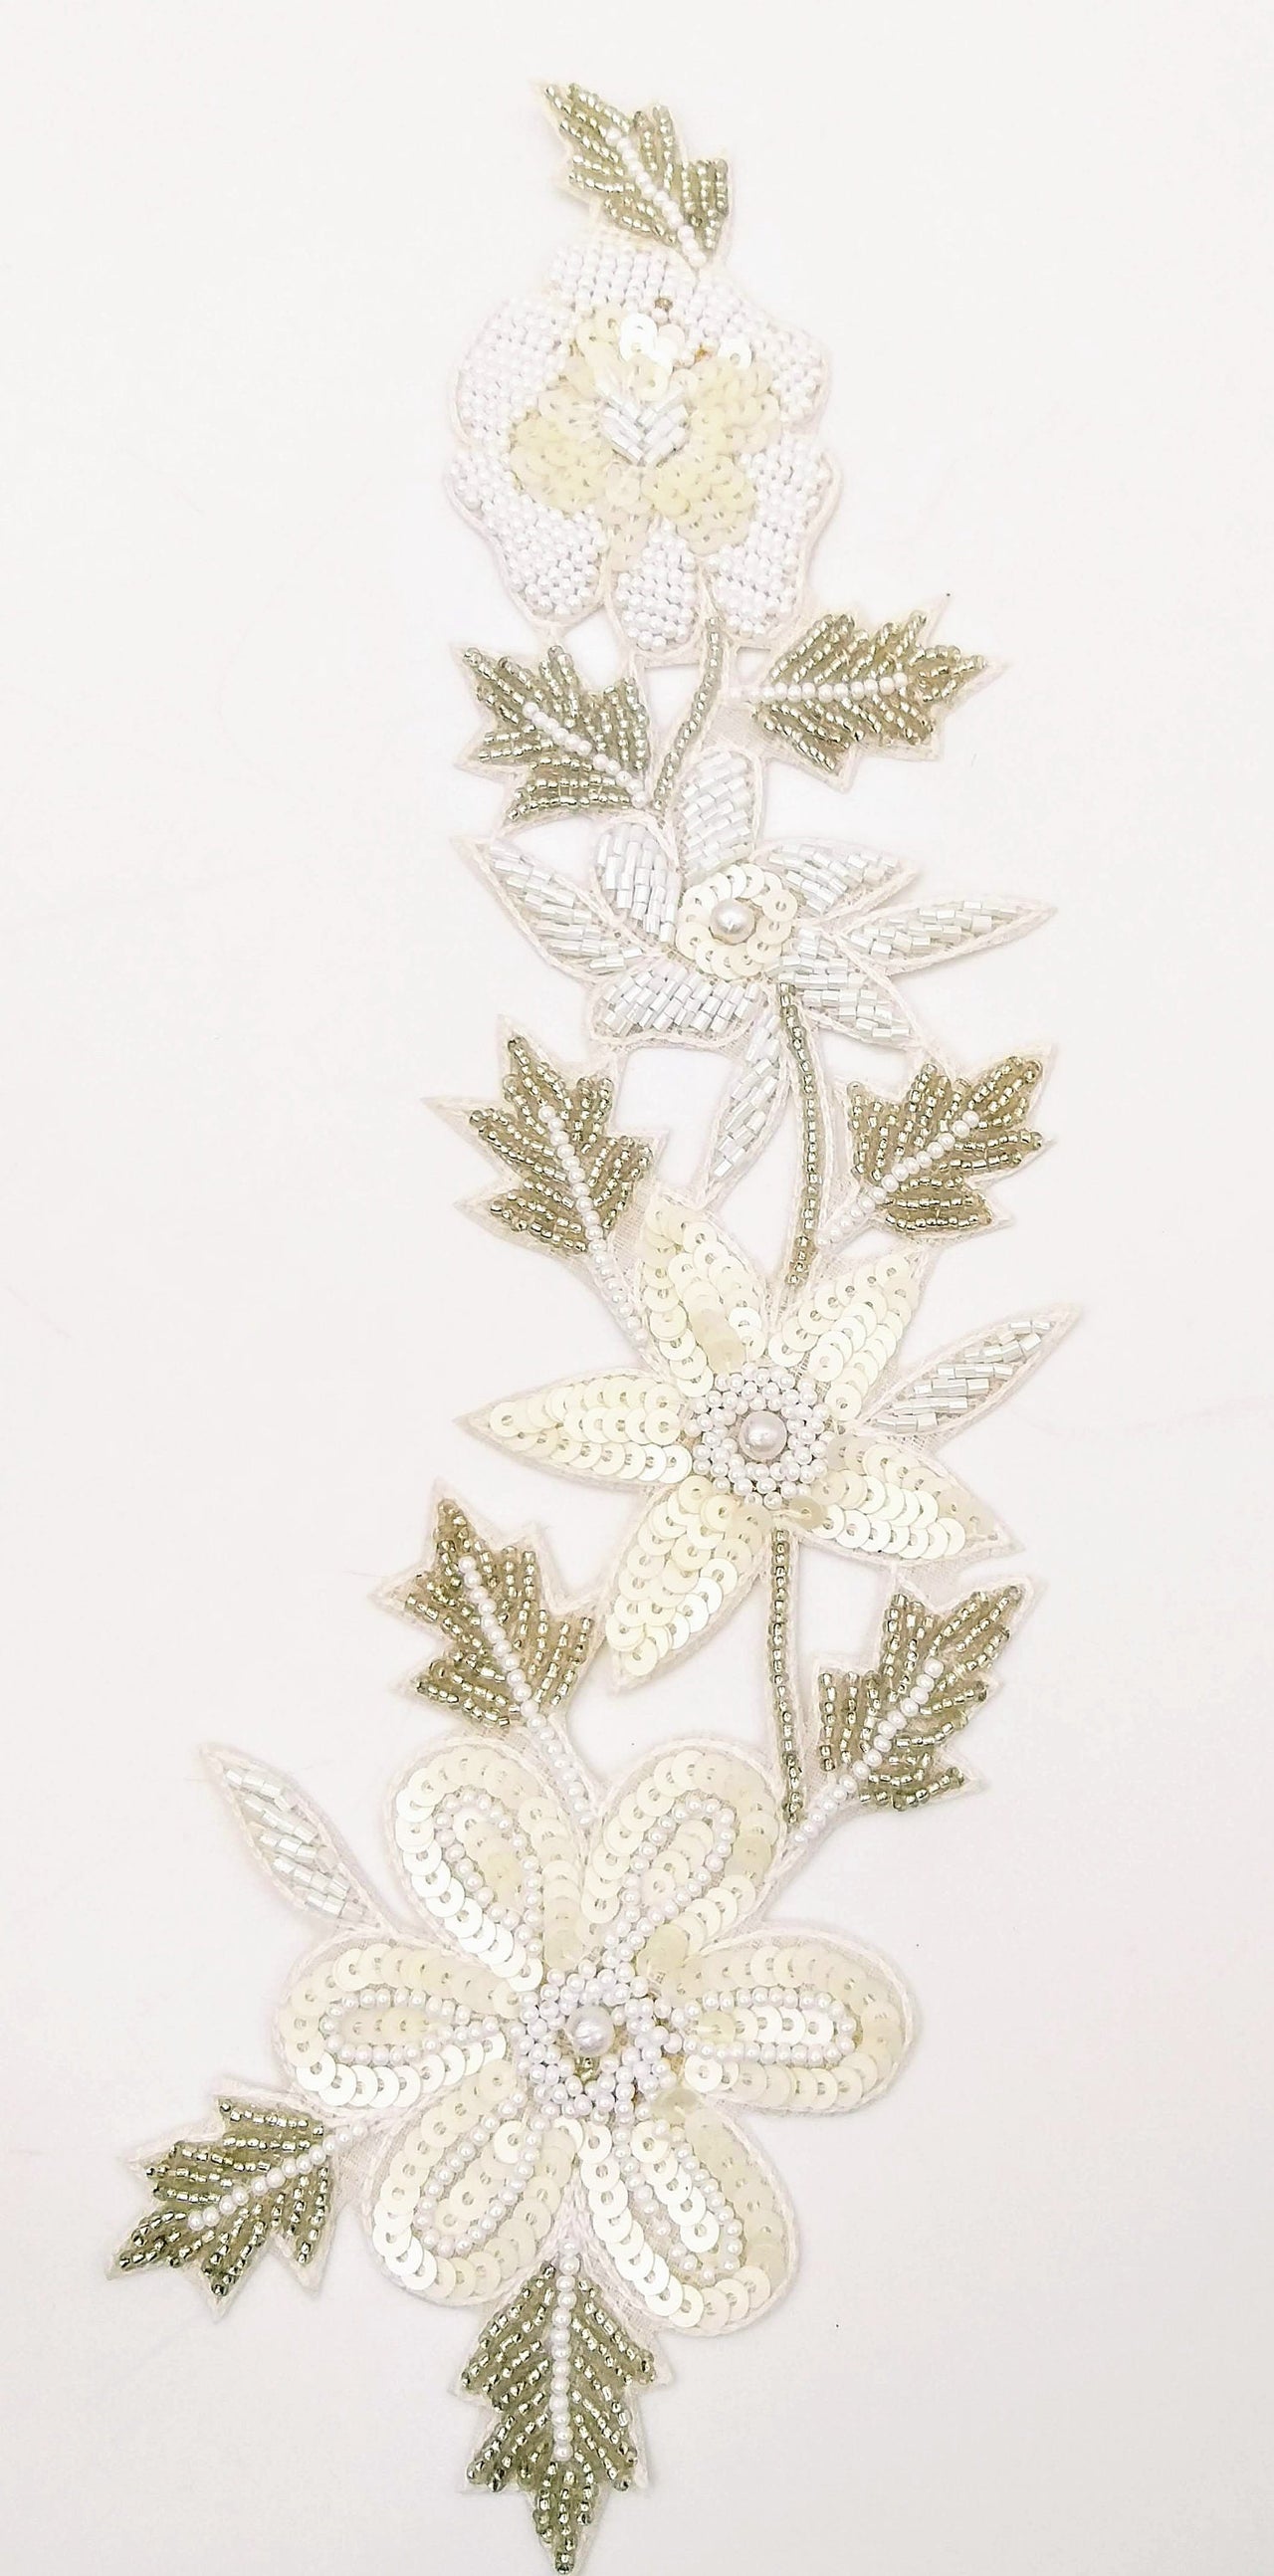 White Floral Applique Hand Embroidered with White Sequins, White Beads, Bugle Beads and Silver Beads